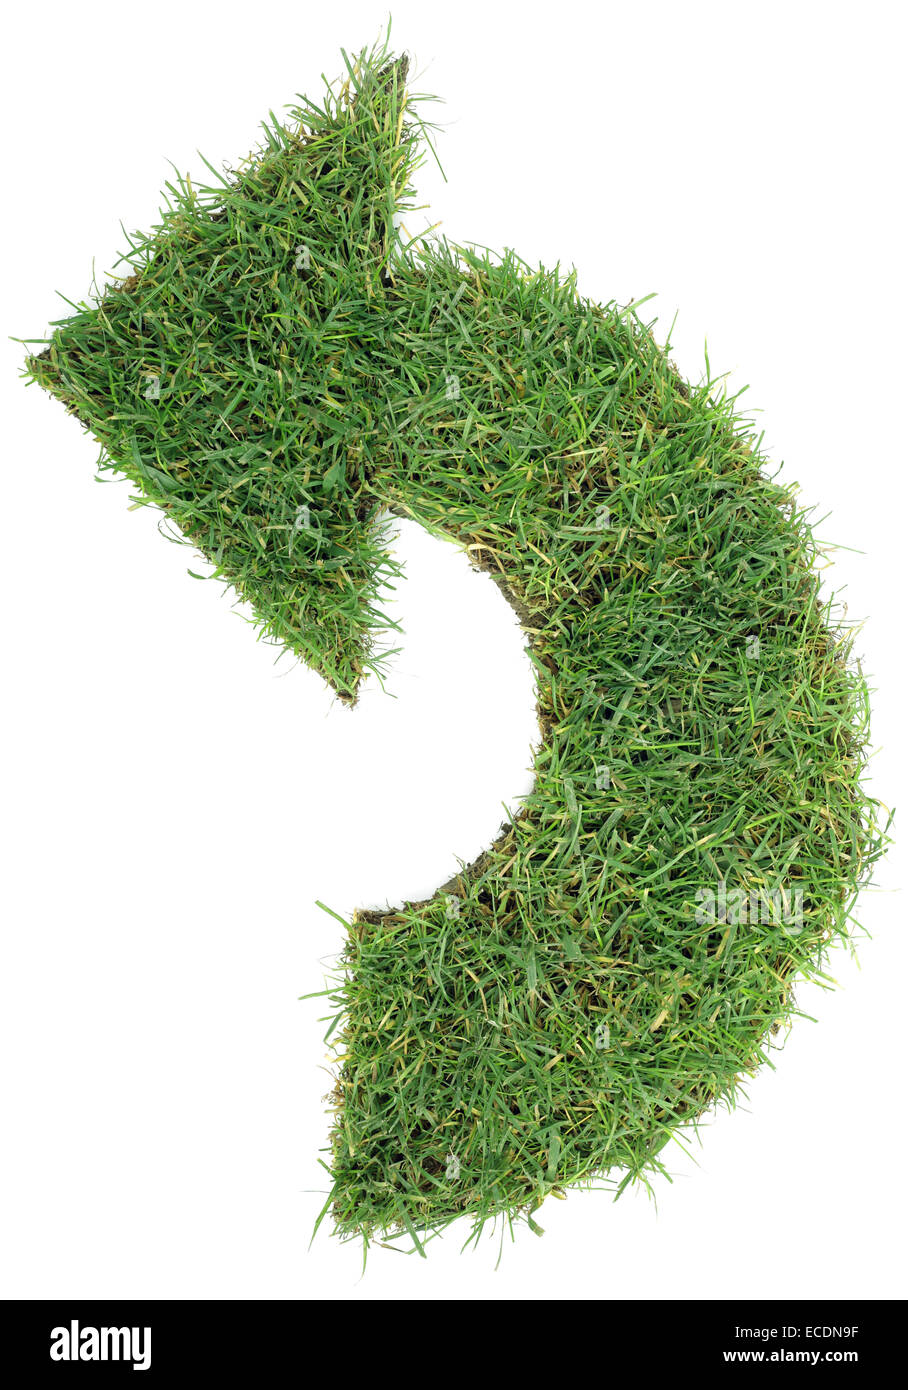 Ecological Green Grass Arrow Isolated on White Background Stock Photo